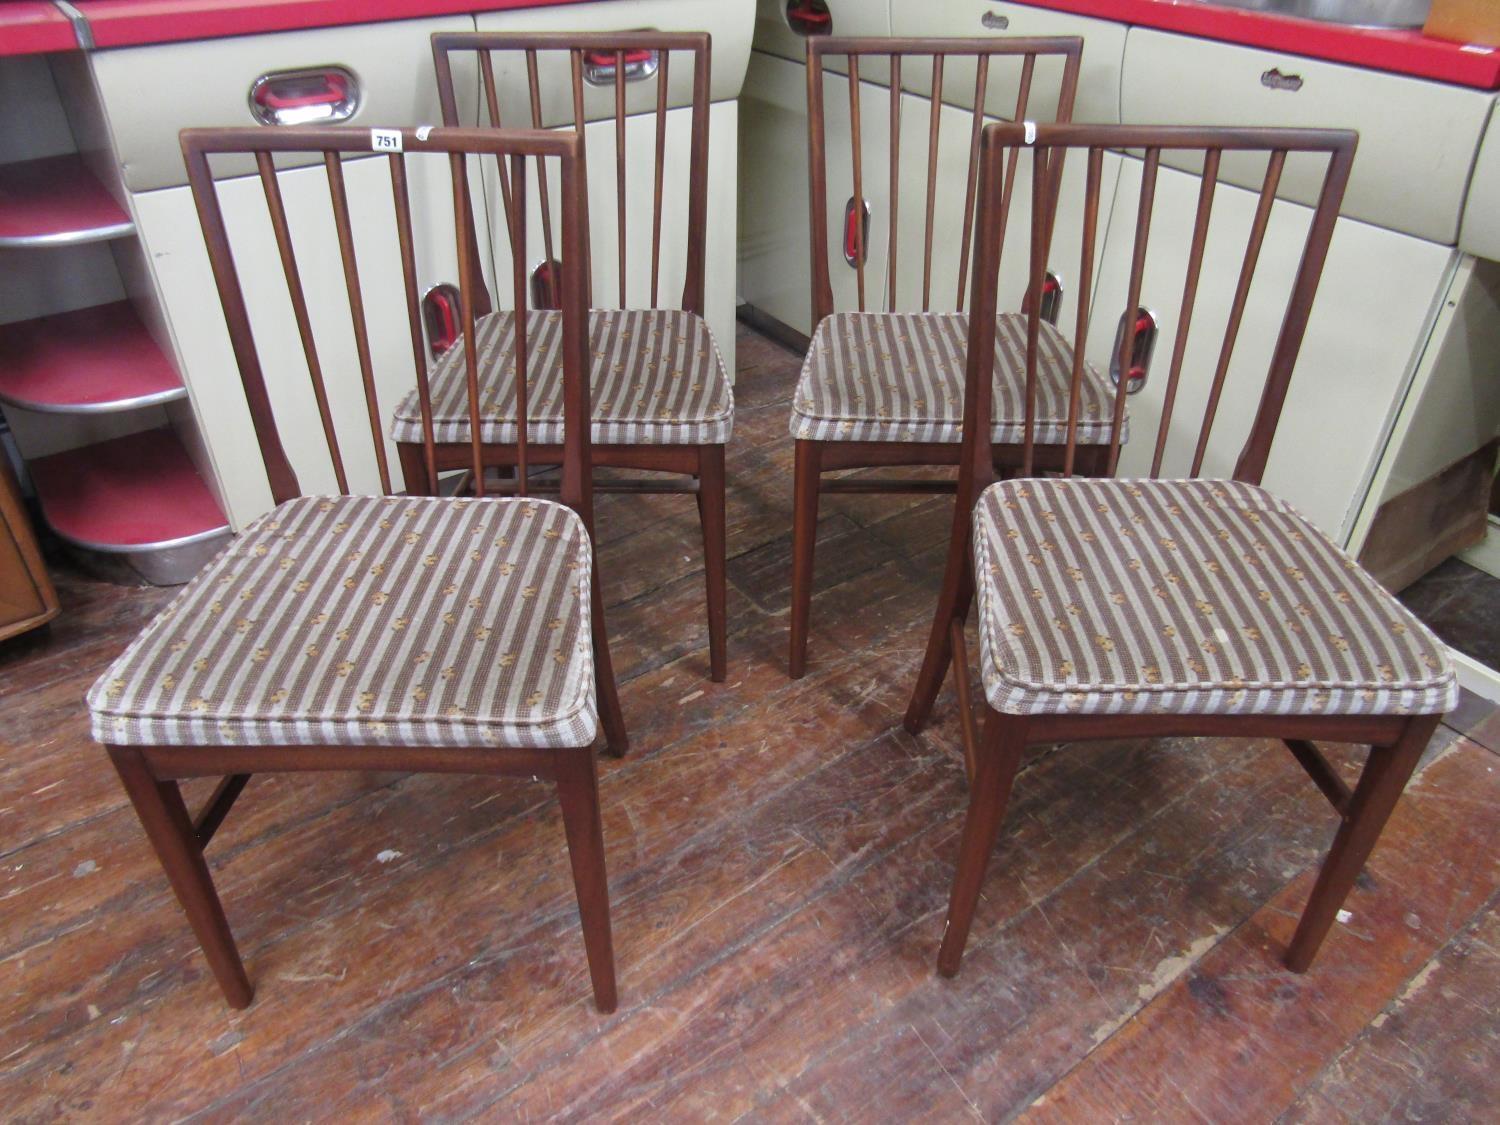 Set of four Danish type teak fan stick back chairs with stuff-over seats